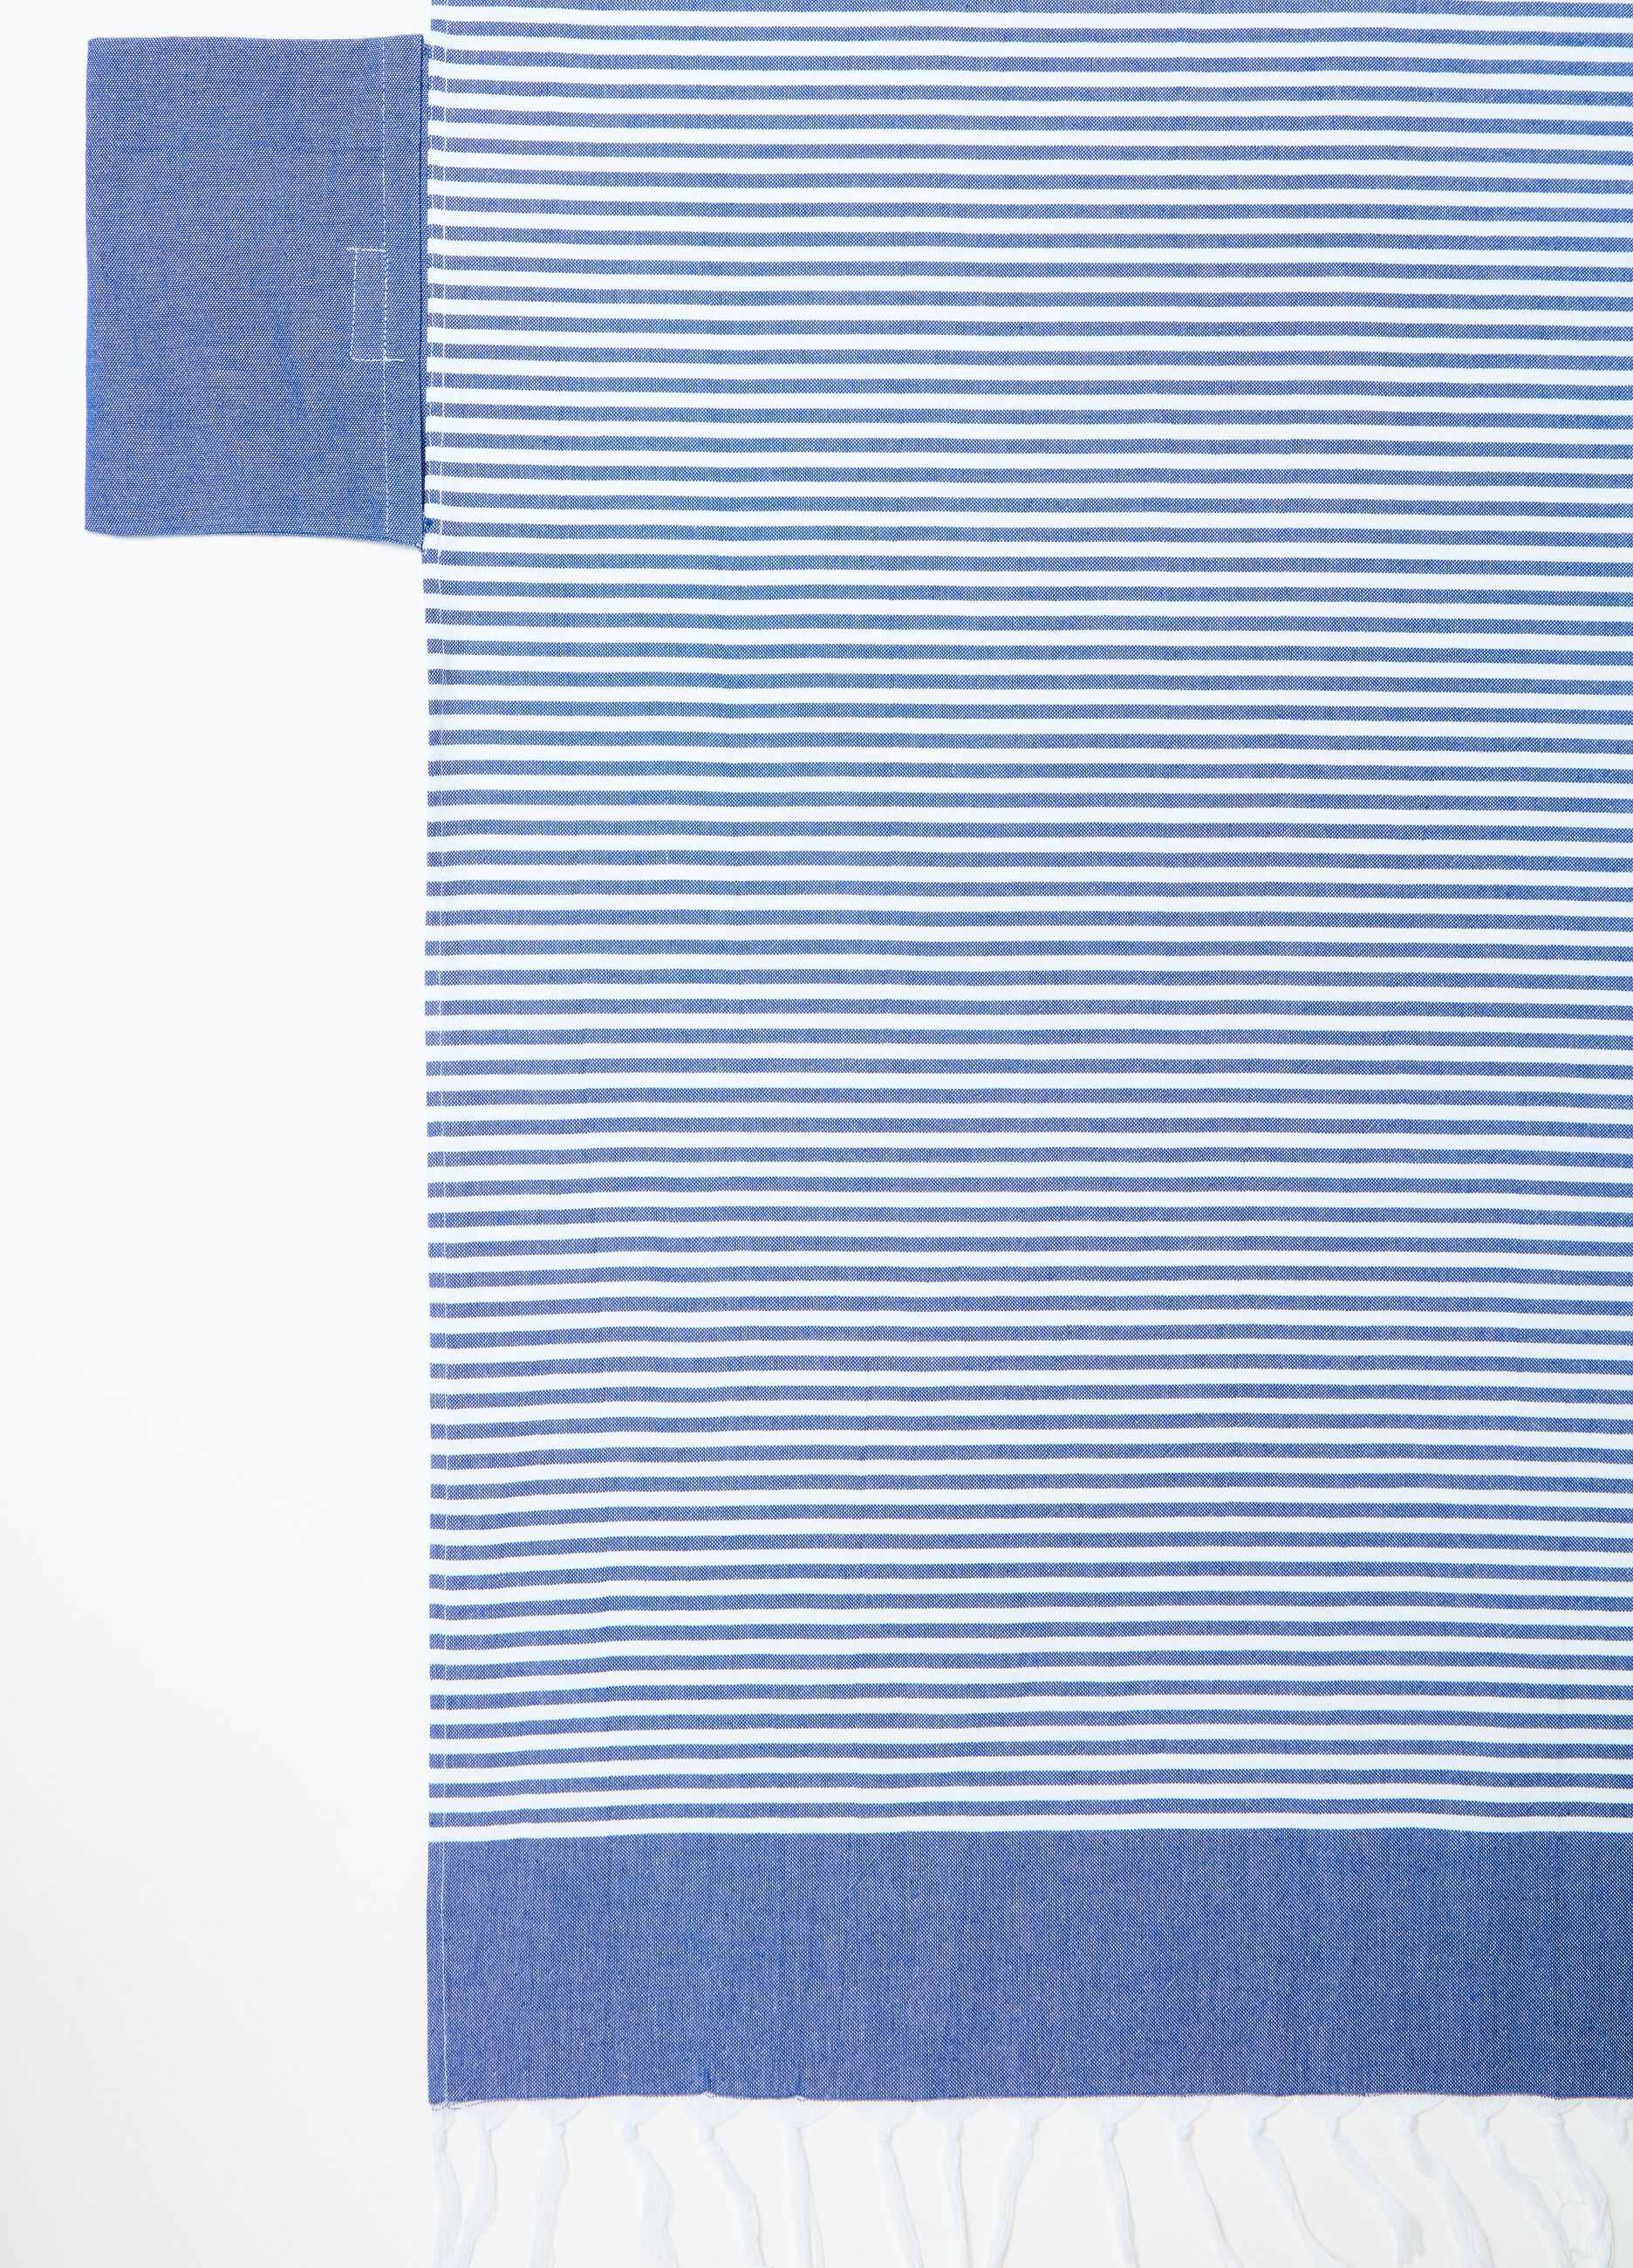 Striped beach towel with small pocket